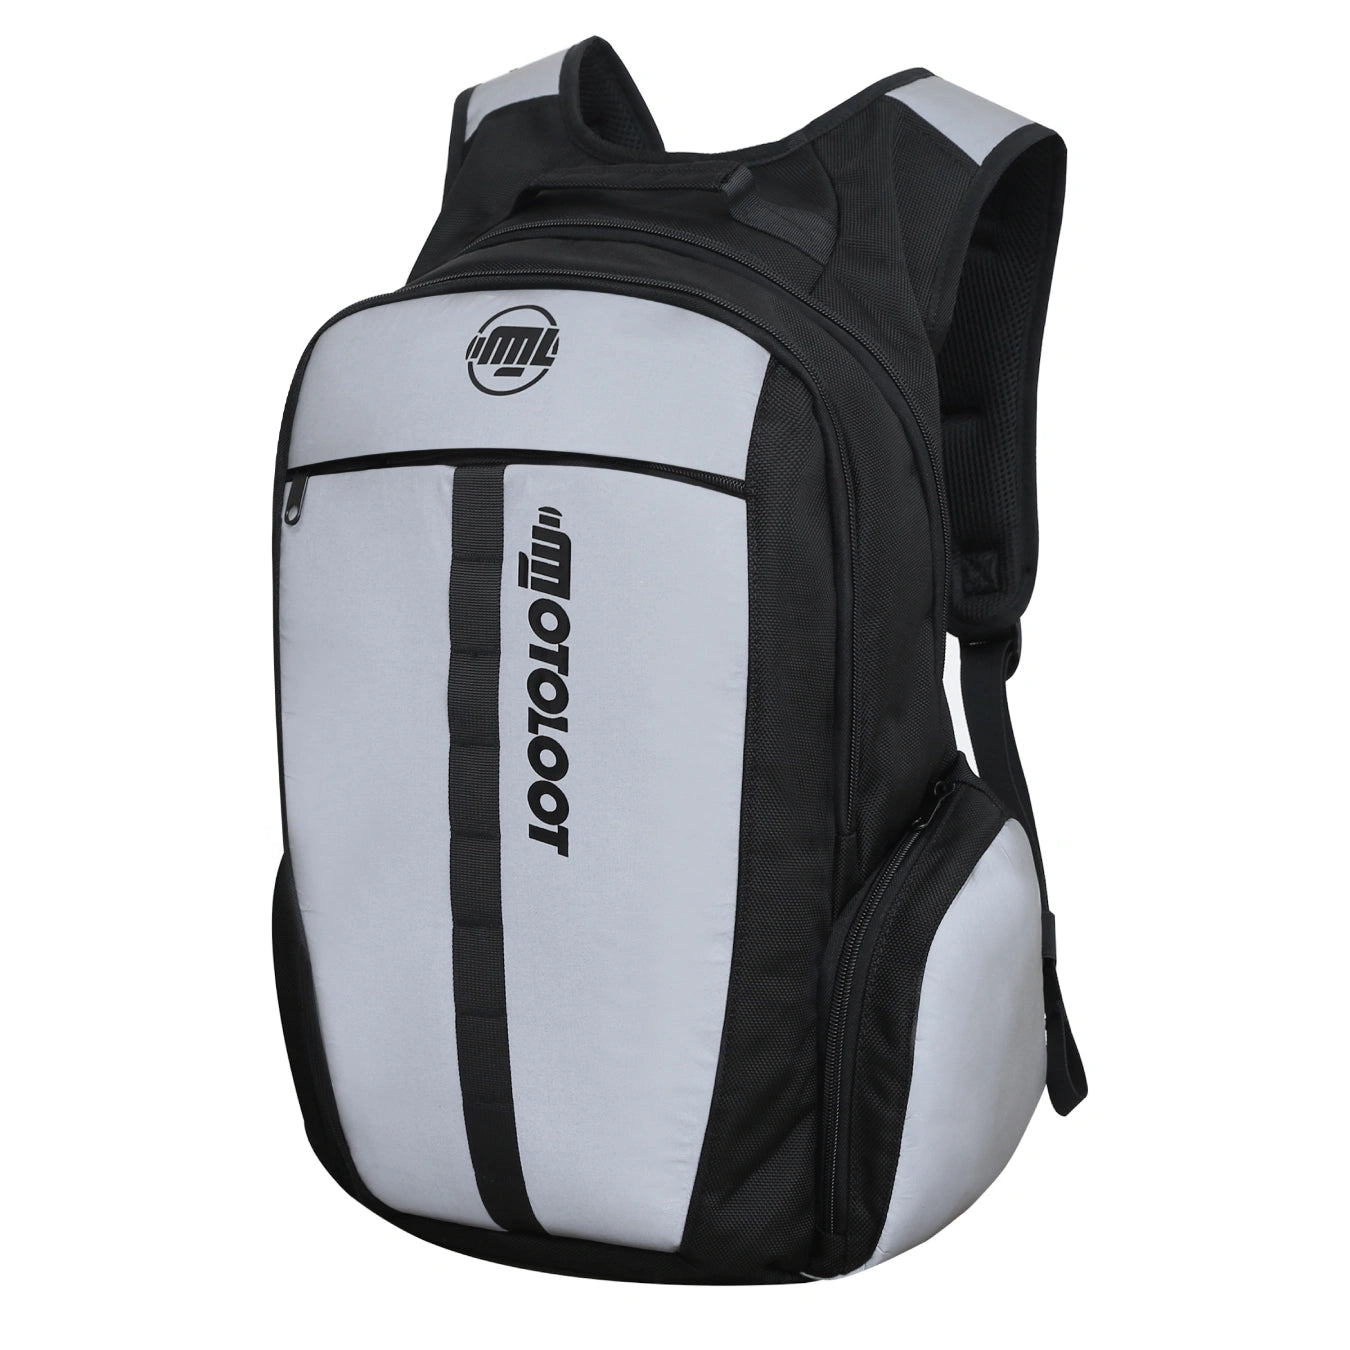 Insanely Reflective Motorcycle Backpack | Moto Loot